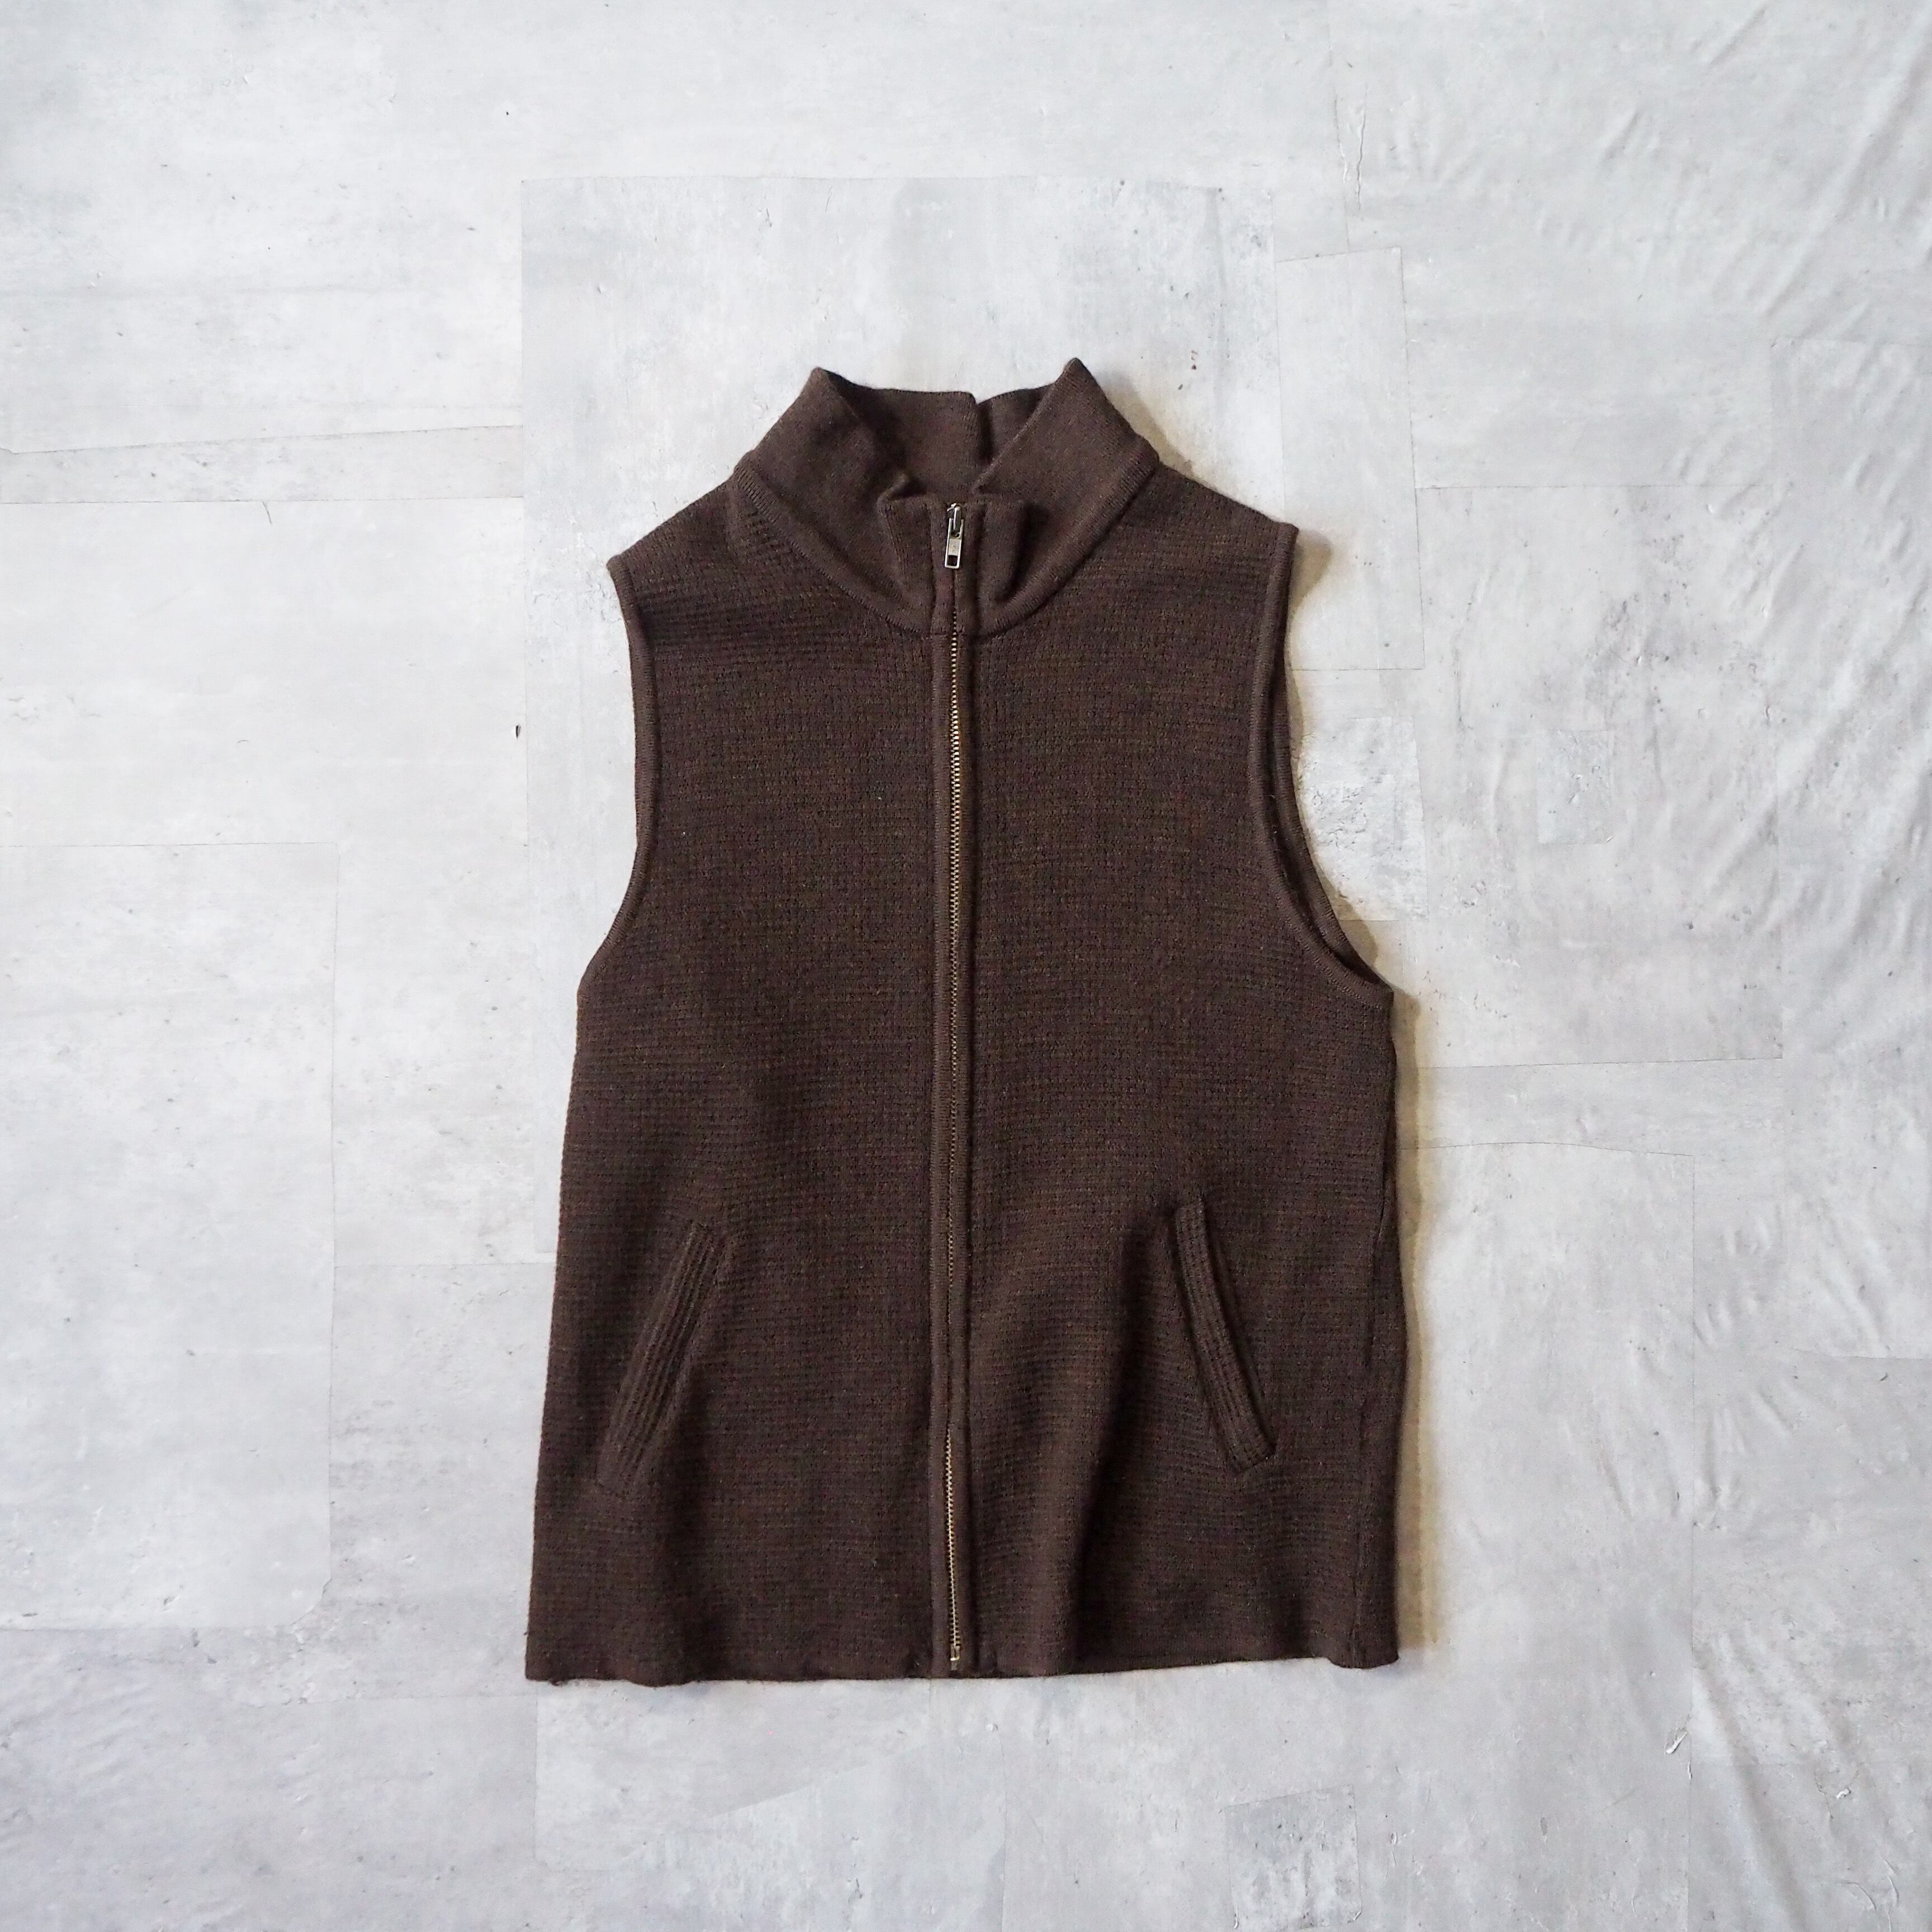 90s “im product” brown high neck knit vest 90年代 アイムプロダクト